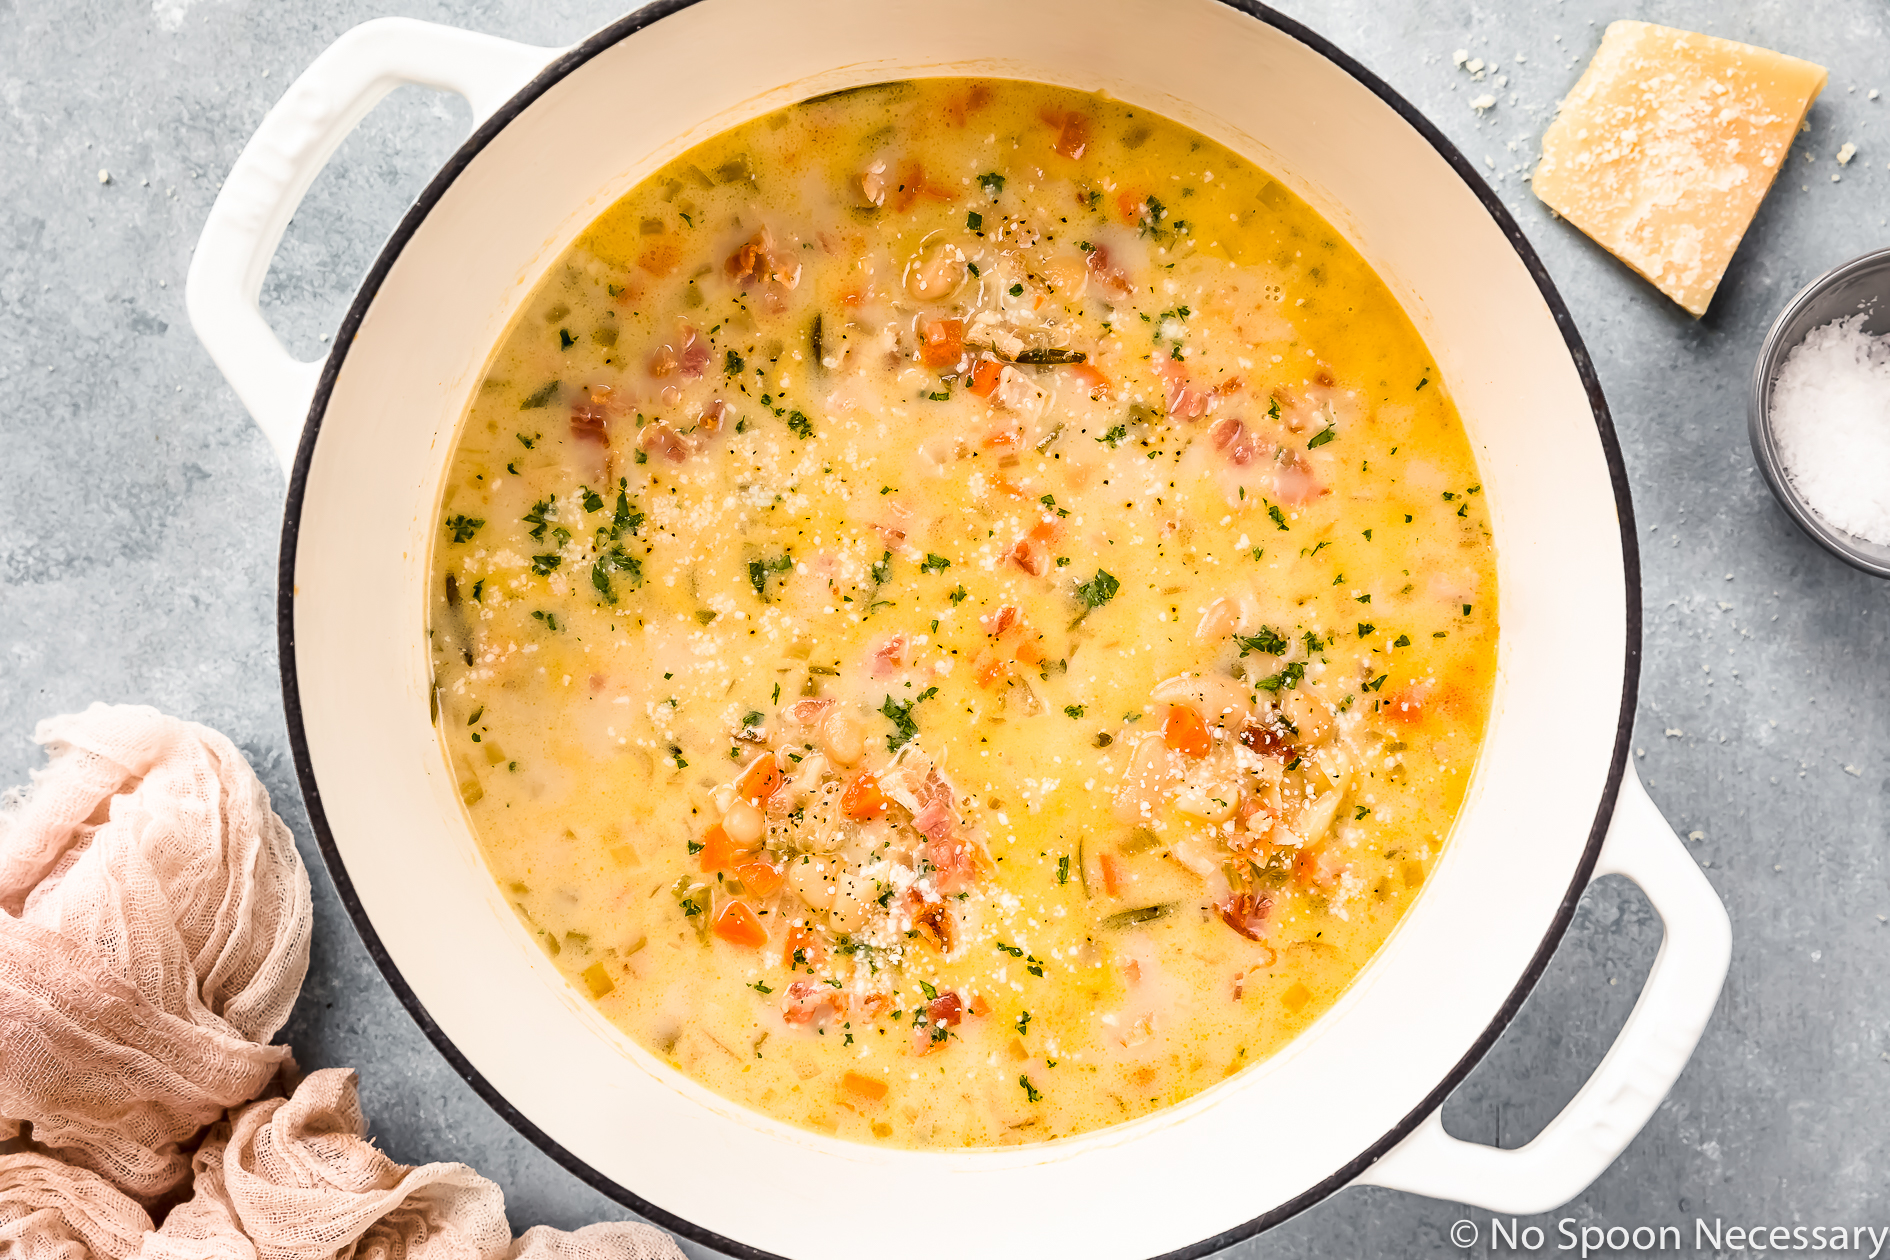 https://www.nospoonnecessary.com/wp-content/uploads/2015/01/Tuscan-White-Bean-Bacon-Soup-37.jpg